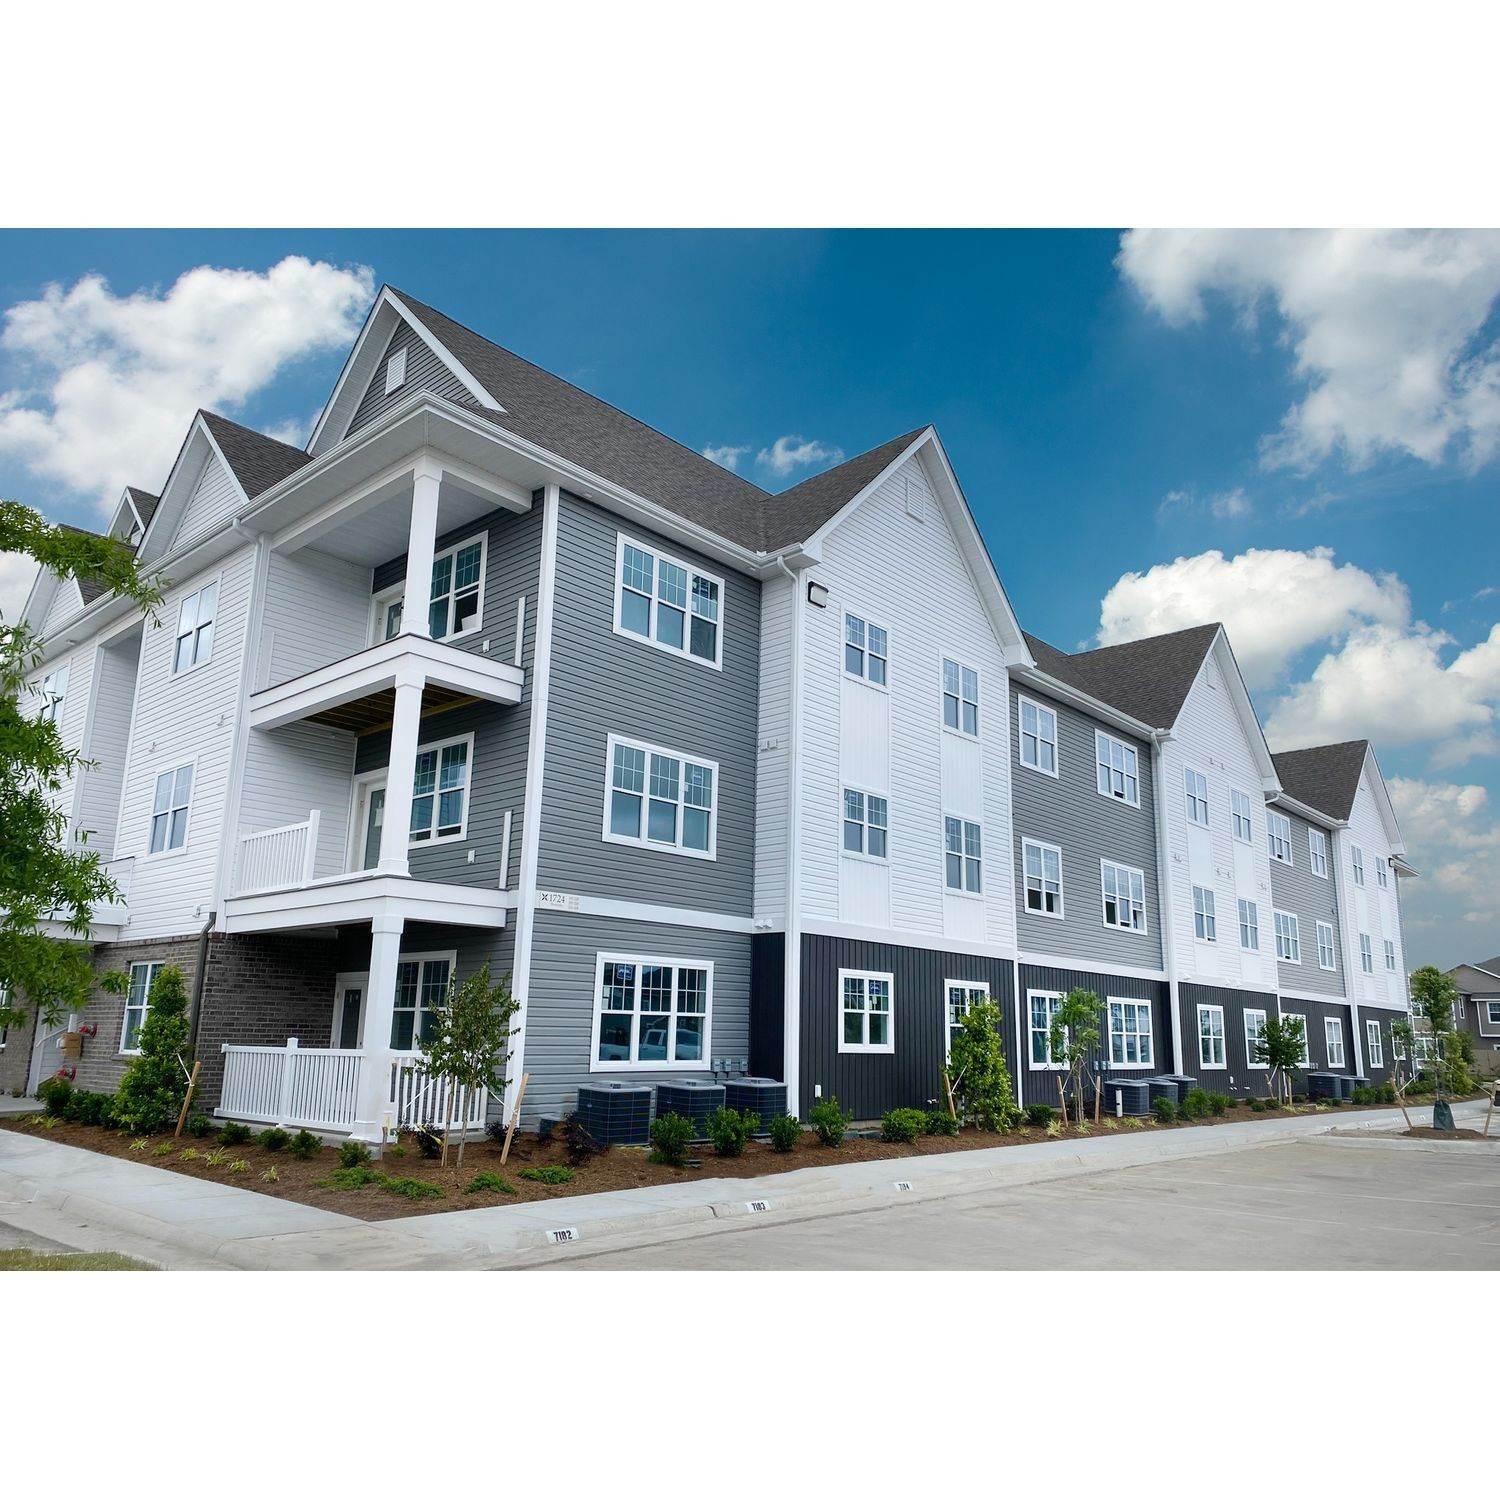 Branford Square at Greenbrier xây dựng tại 1509 Waitsel Drive, Suite 108, Chesapeake, VA 23320